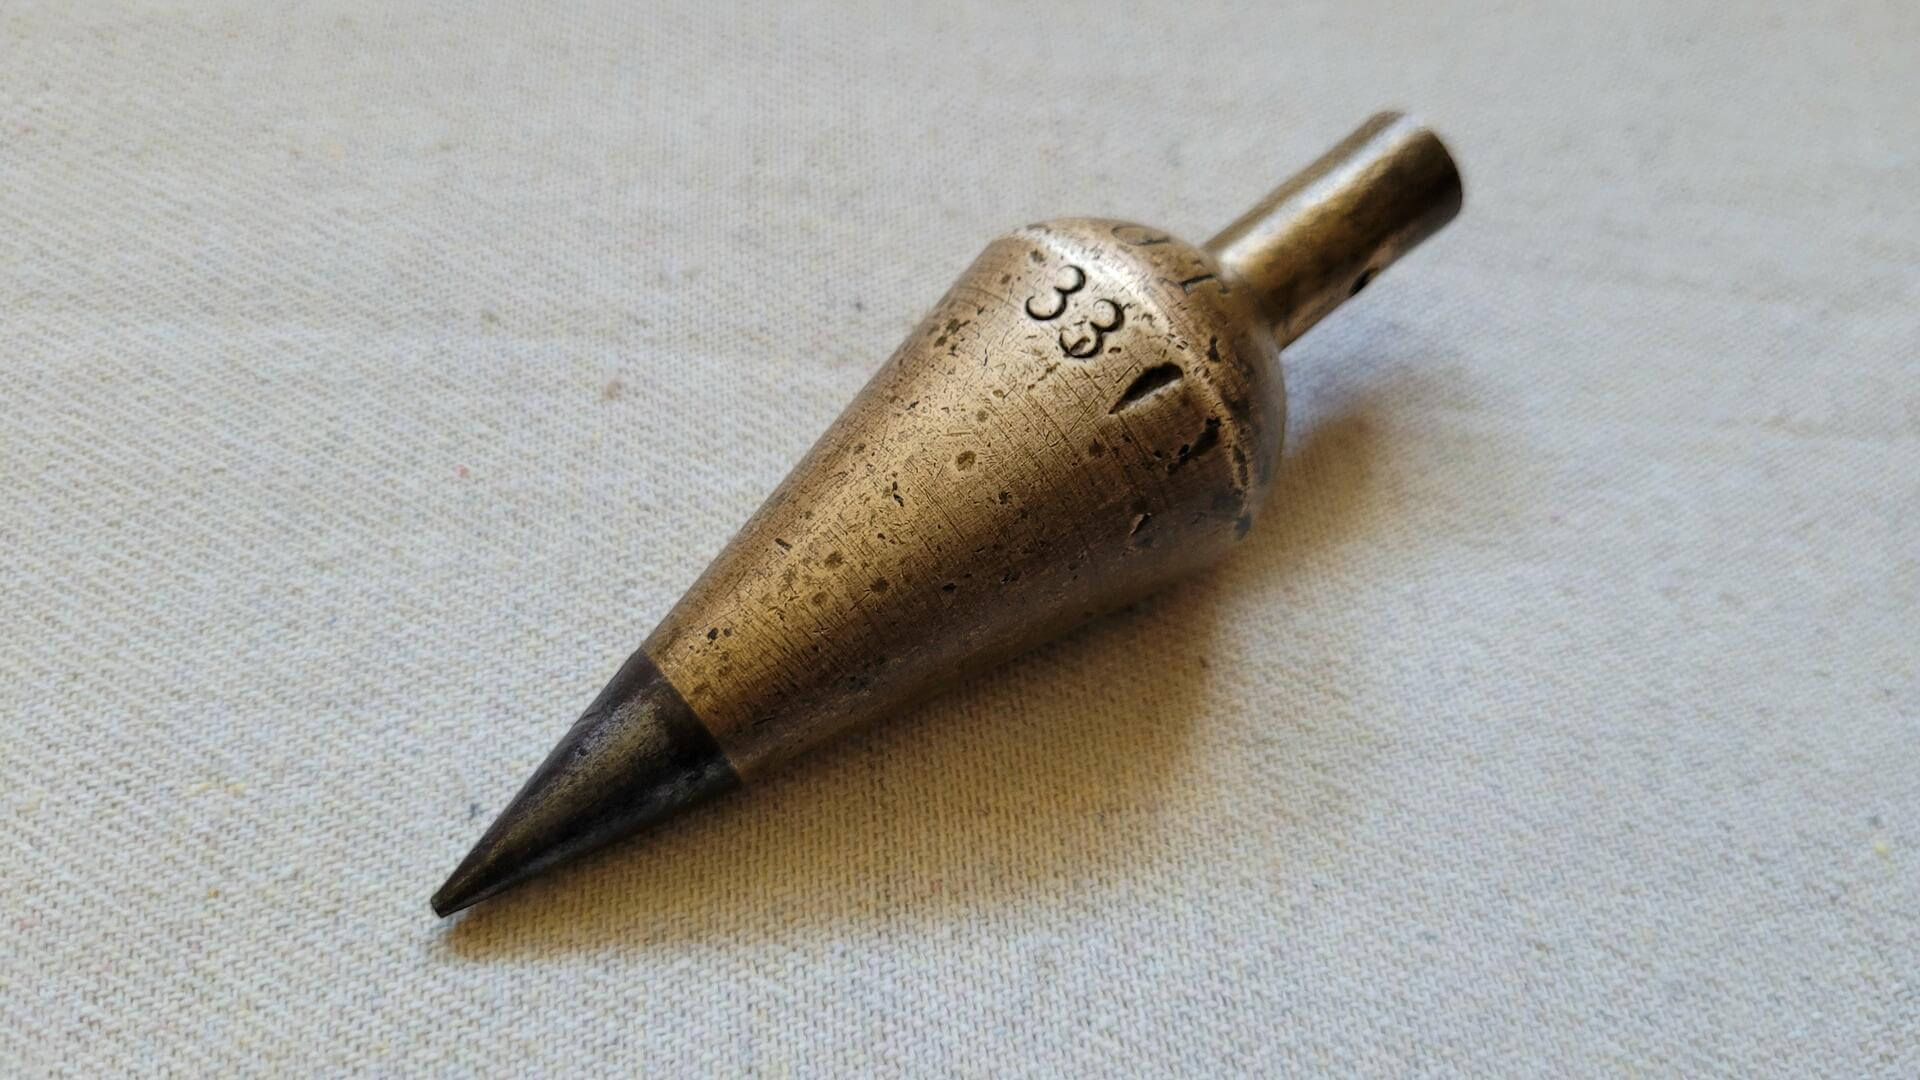 antique-solid-brass-varrot-style-plumb-bob-with-steel-point-tip-vintage-marking-measuring-woodworking-stone-mason-collectible-hand-tool